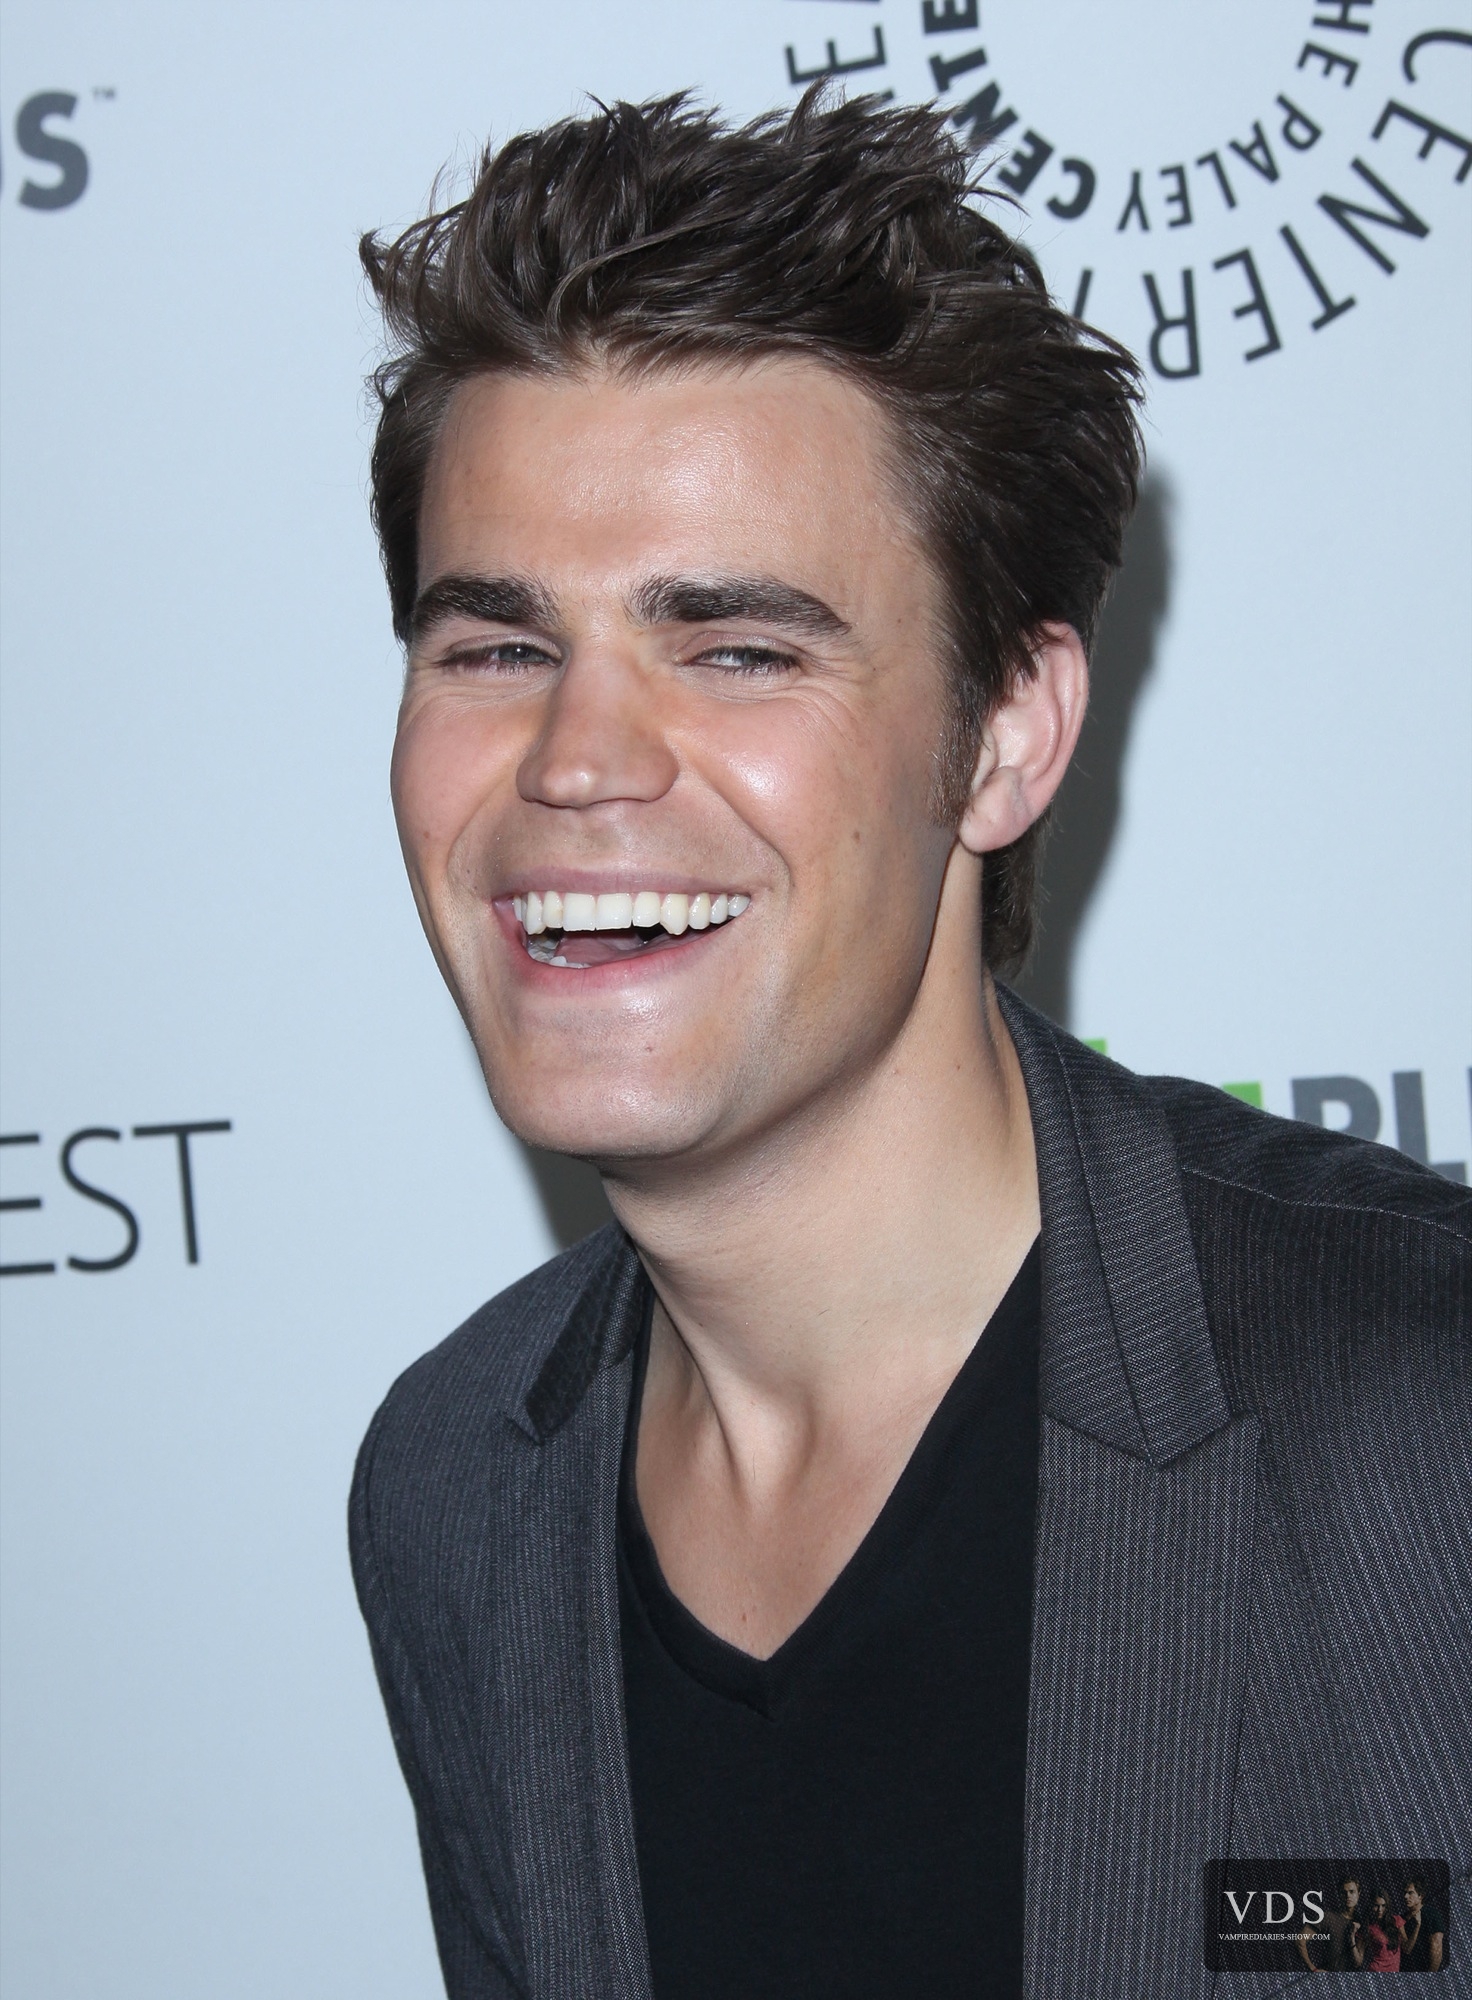 paul wesley, images, image, wallpaper, photos, photo, photograph, gallery, paul...